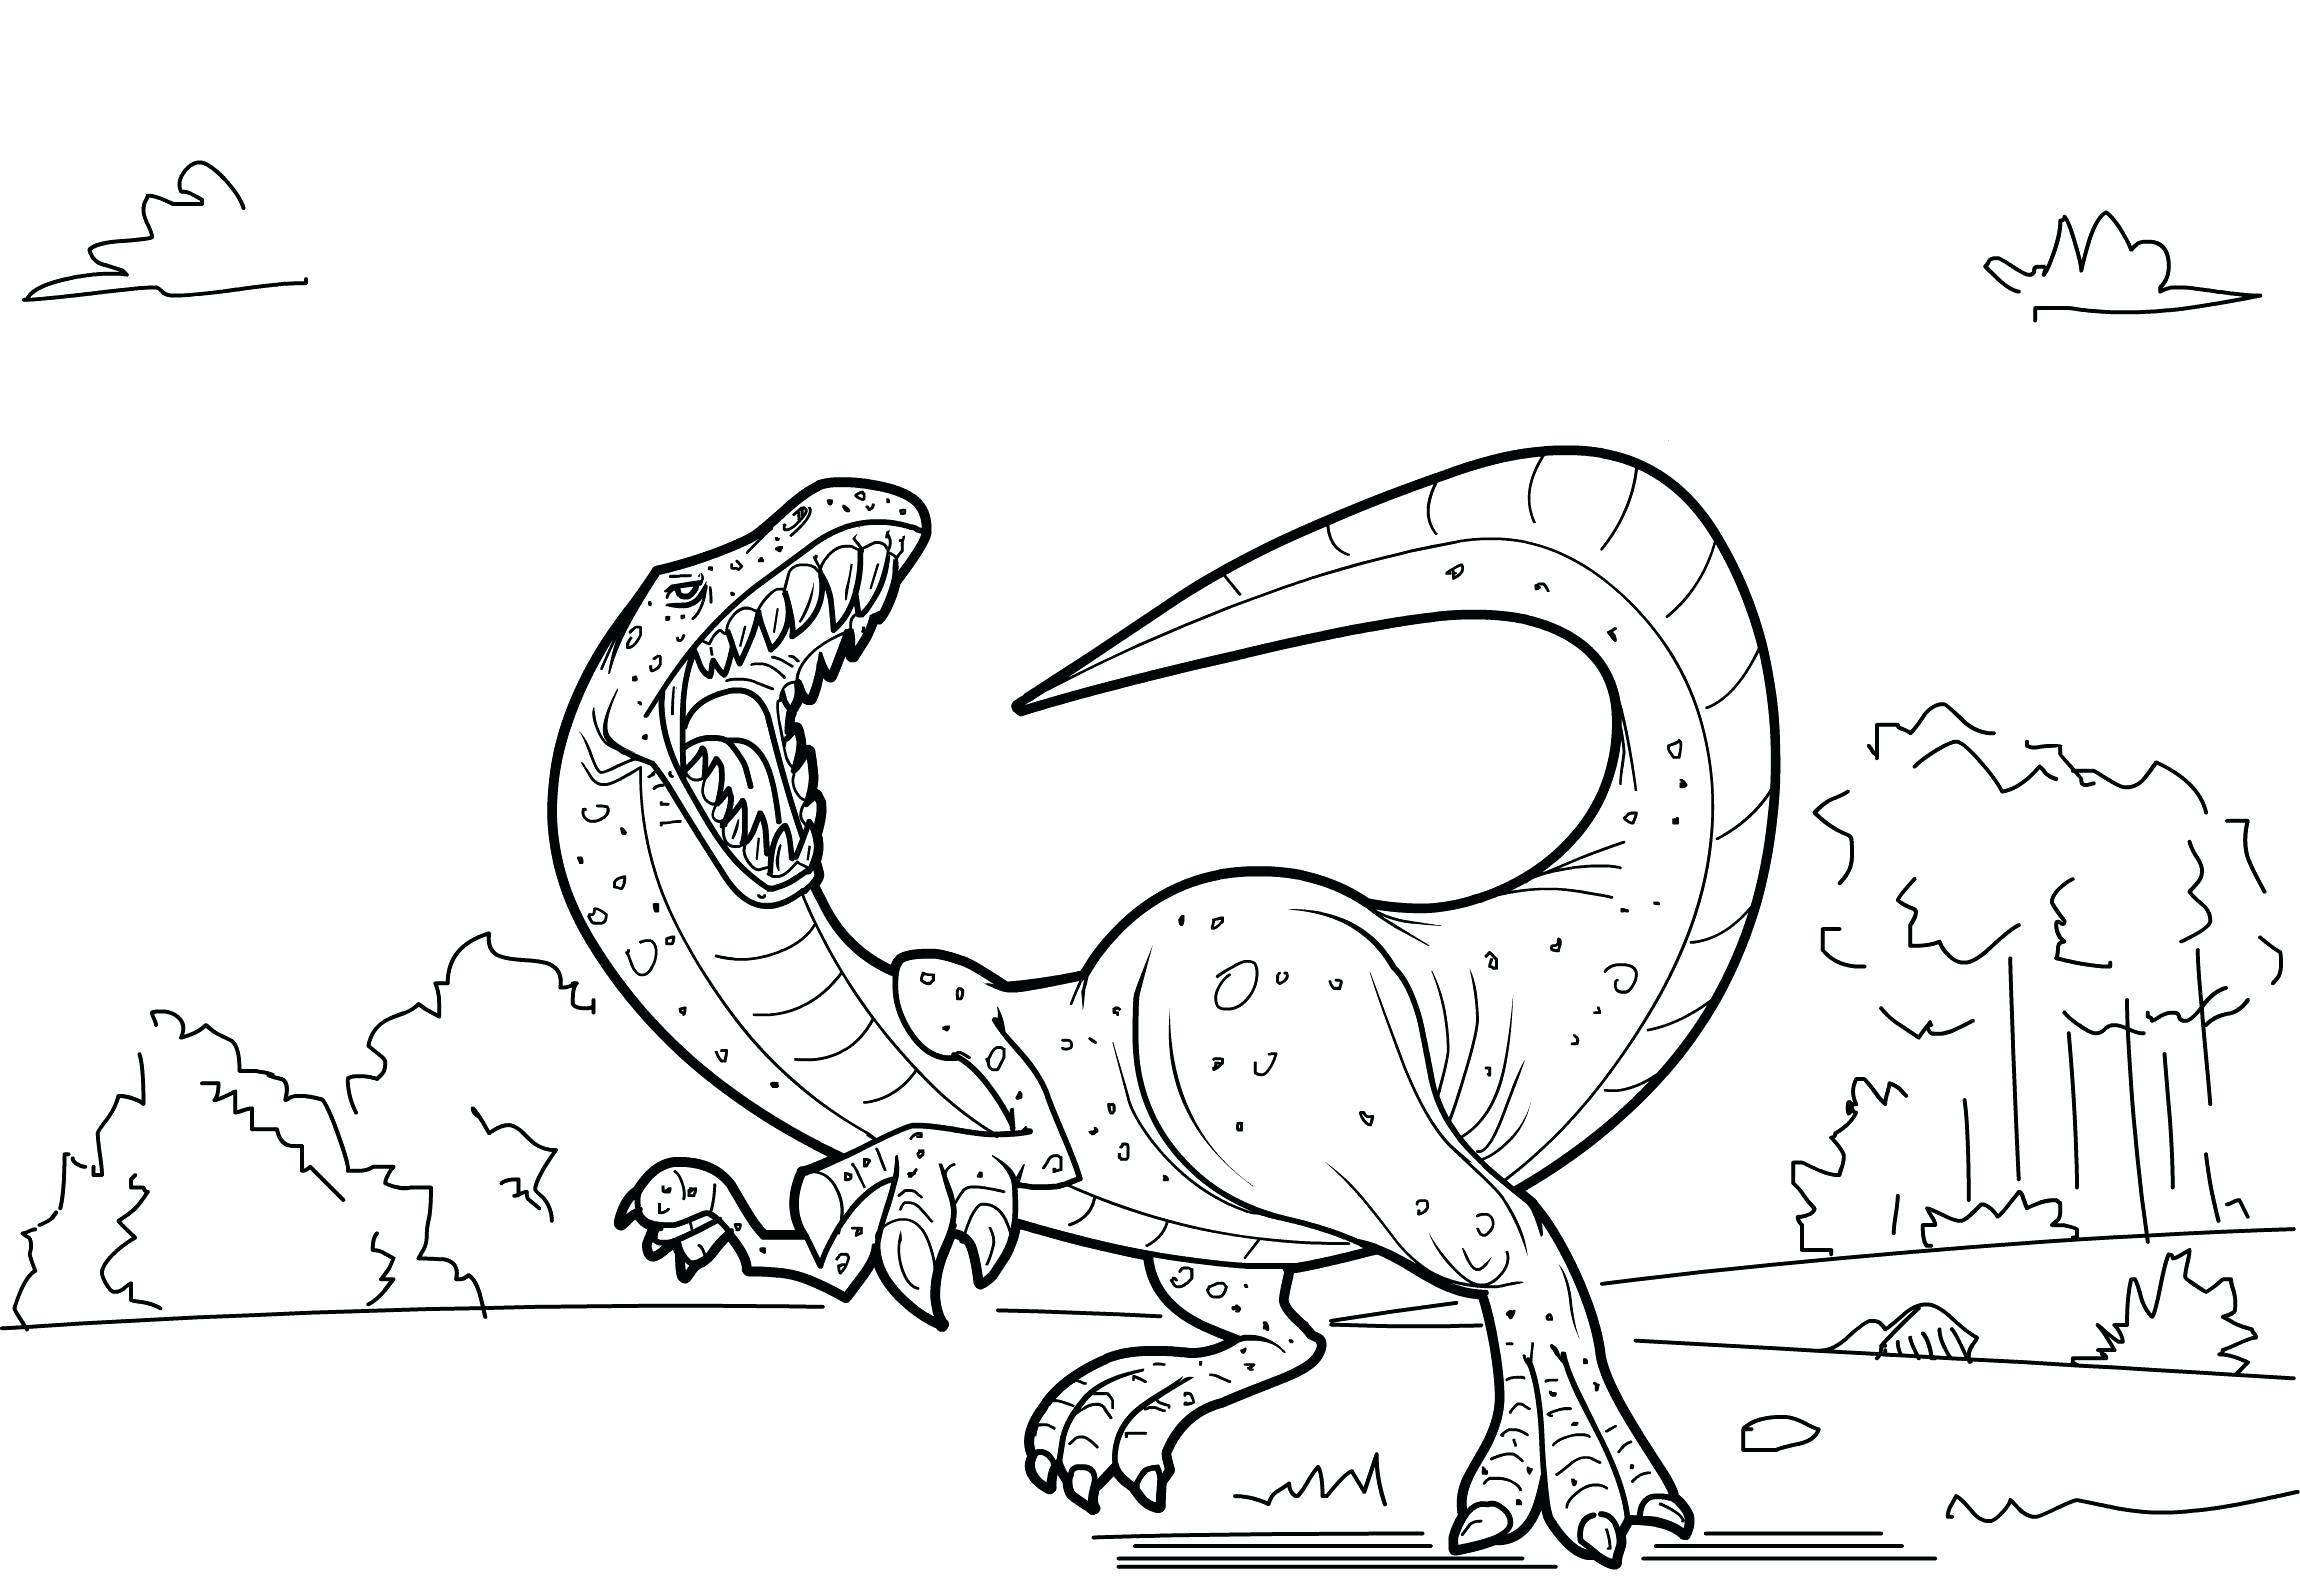 dinosaur-coloring-pages-triceratops-at-getcolorings-free-printable-colorings-pages-to